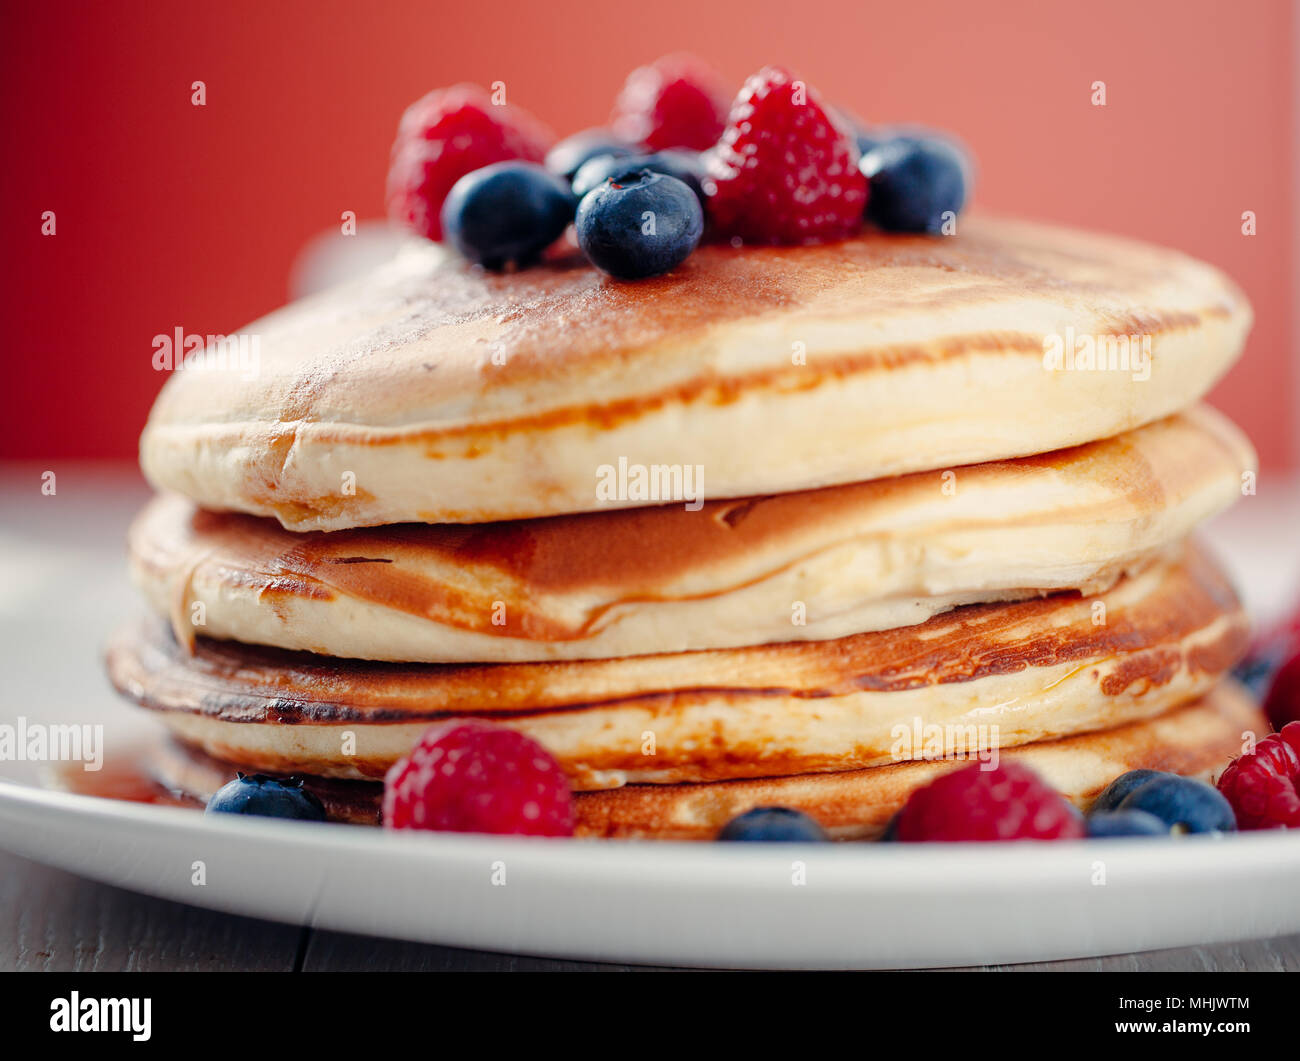 Pancakes with berries and maple syrup Stock Photo